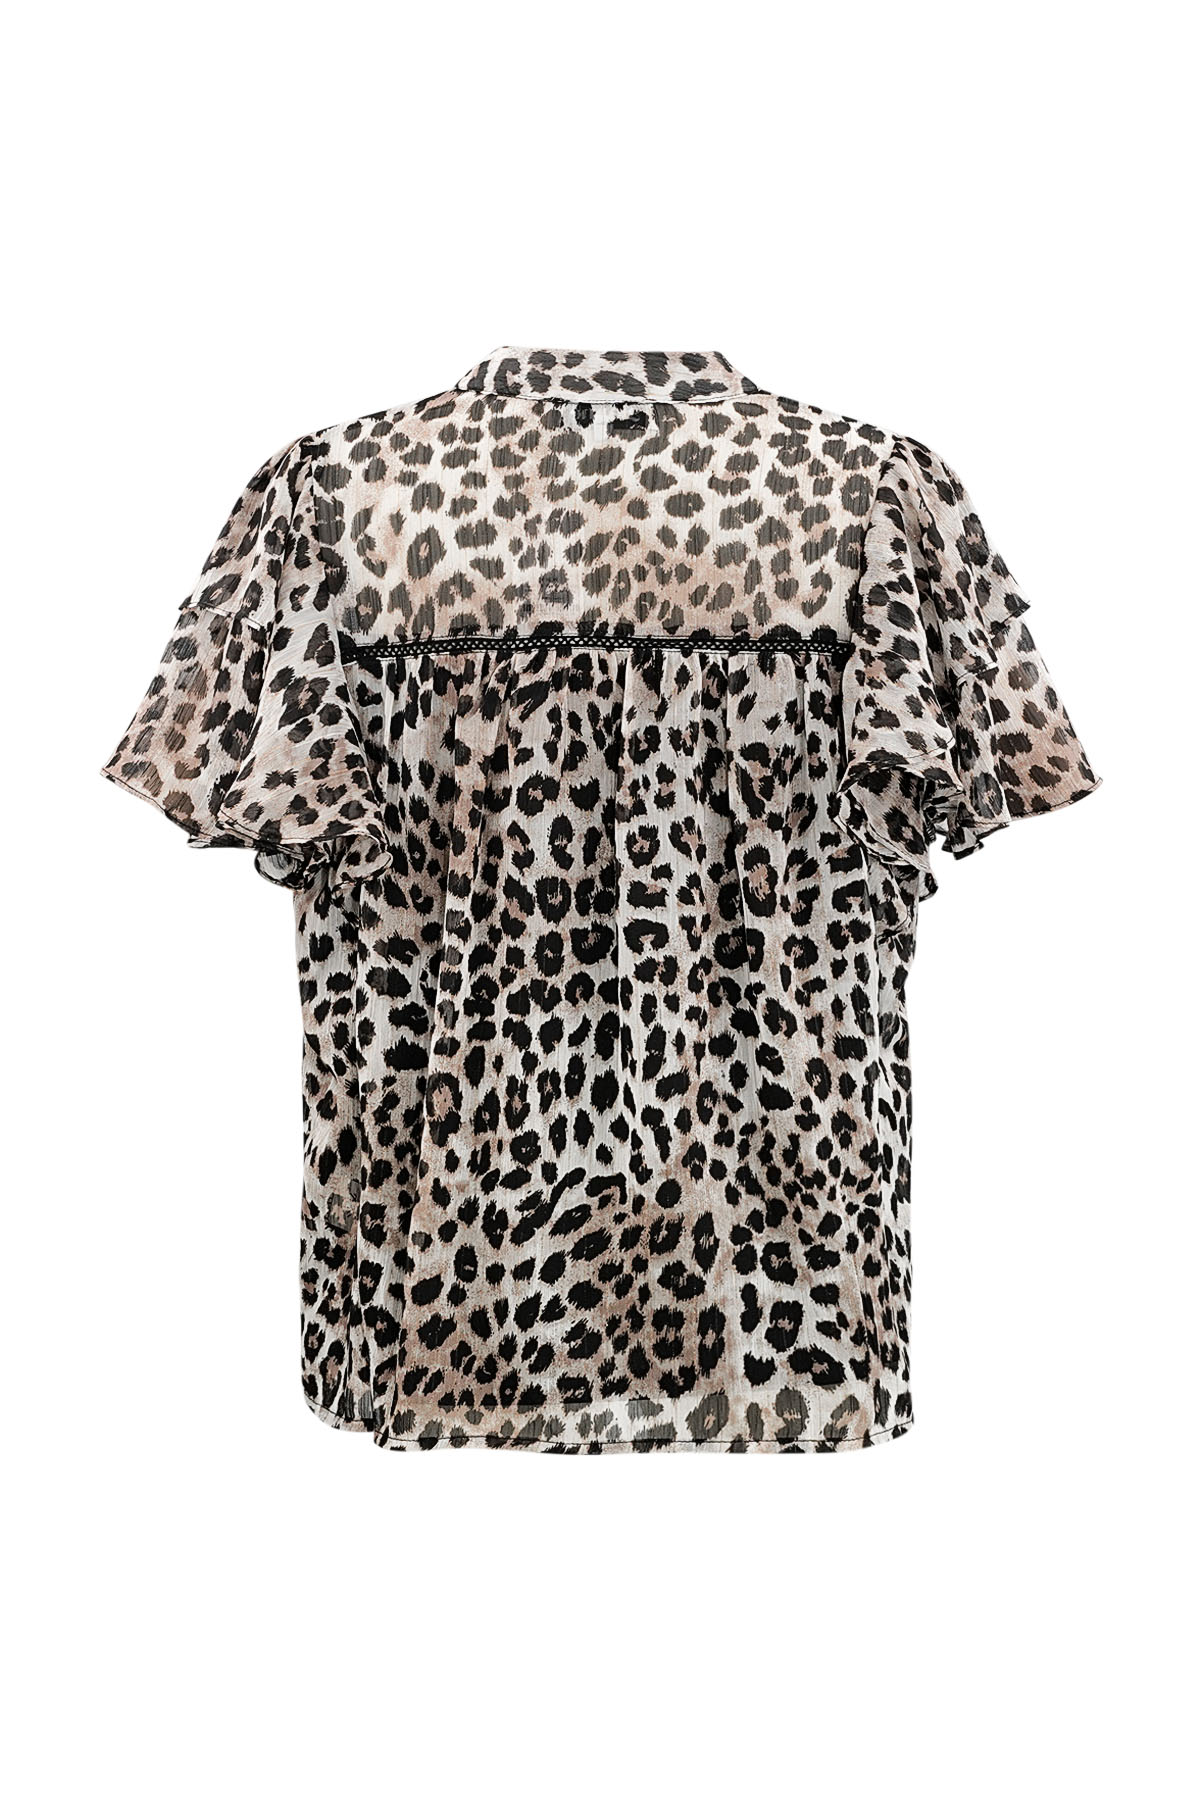 Leopard print top flare sleeves - brown h5 Picture6